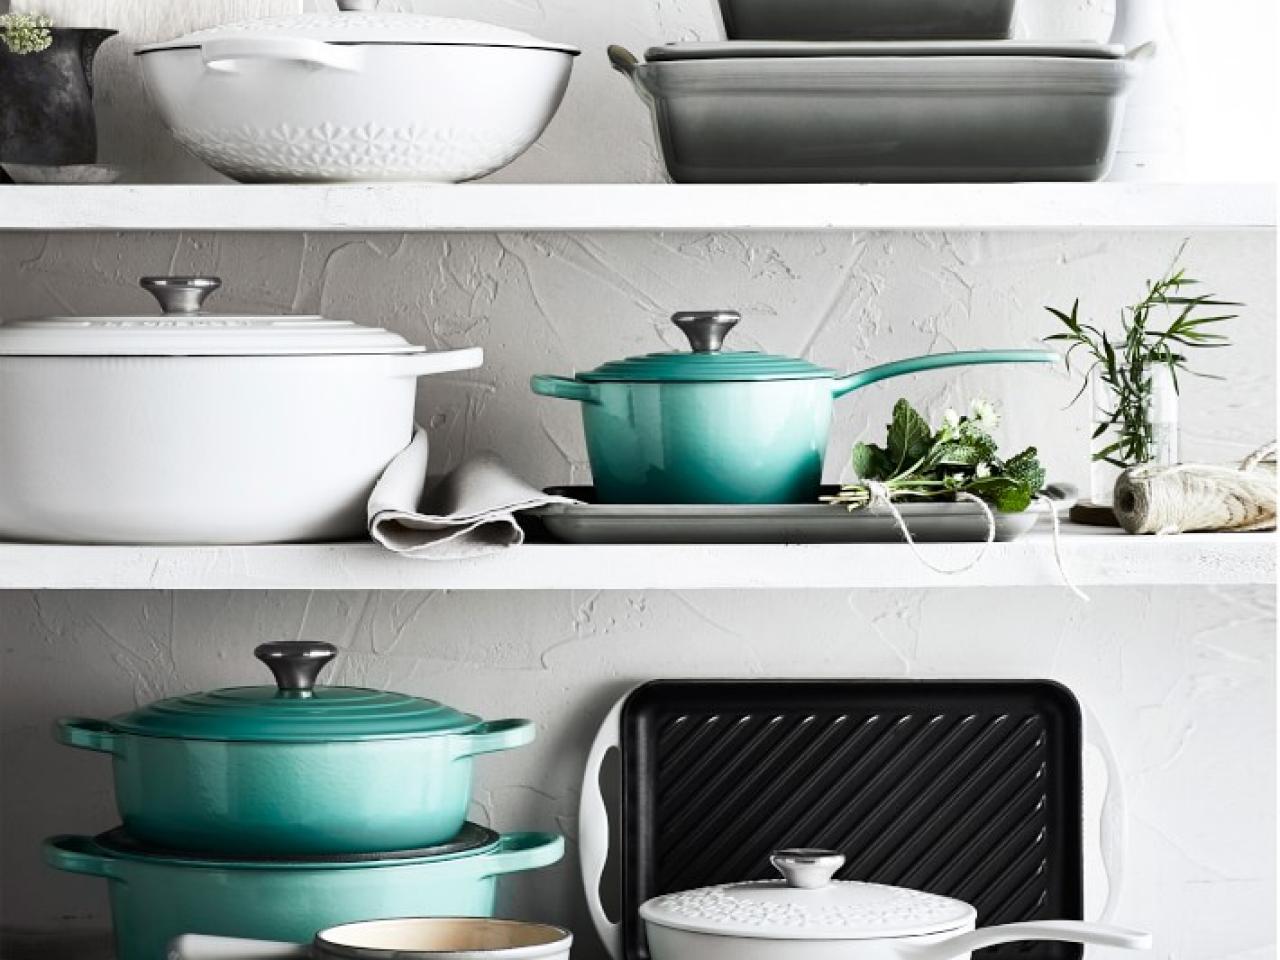 Le Creuset Cookware Deals - Up To 40% Off